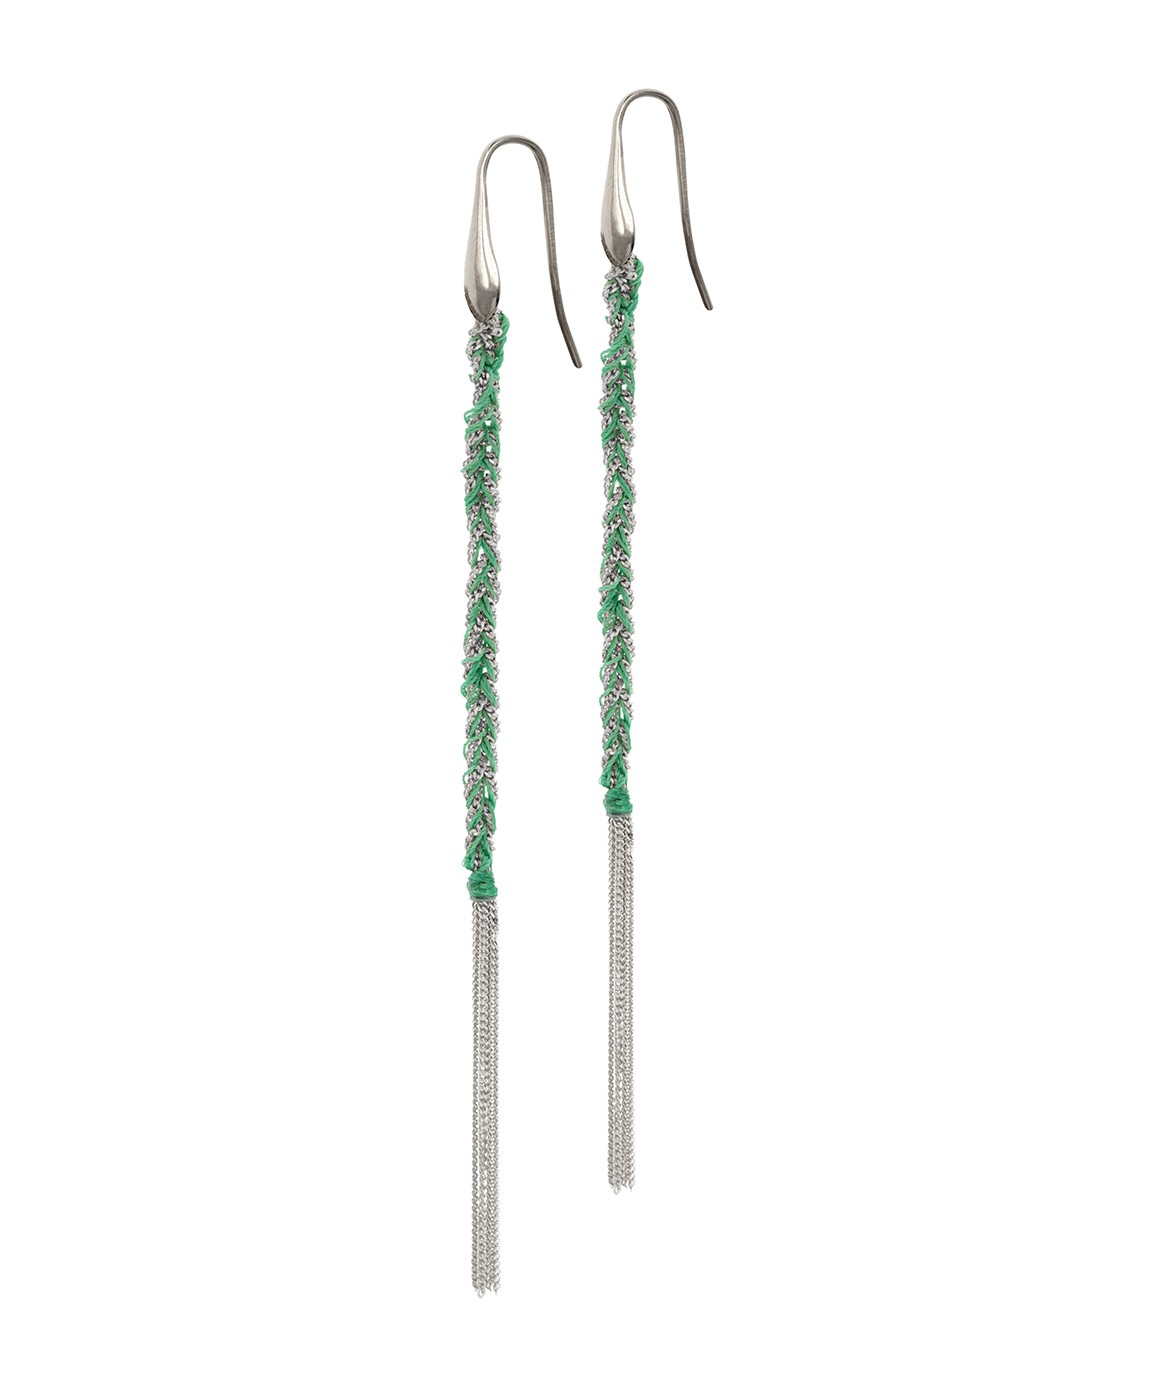 TWIST Earrings in Sterling Silver Rhodium plated. Fabric: Emerald